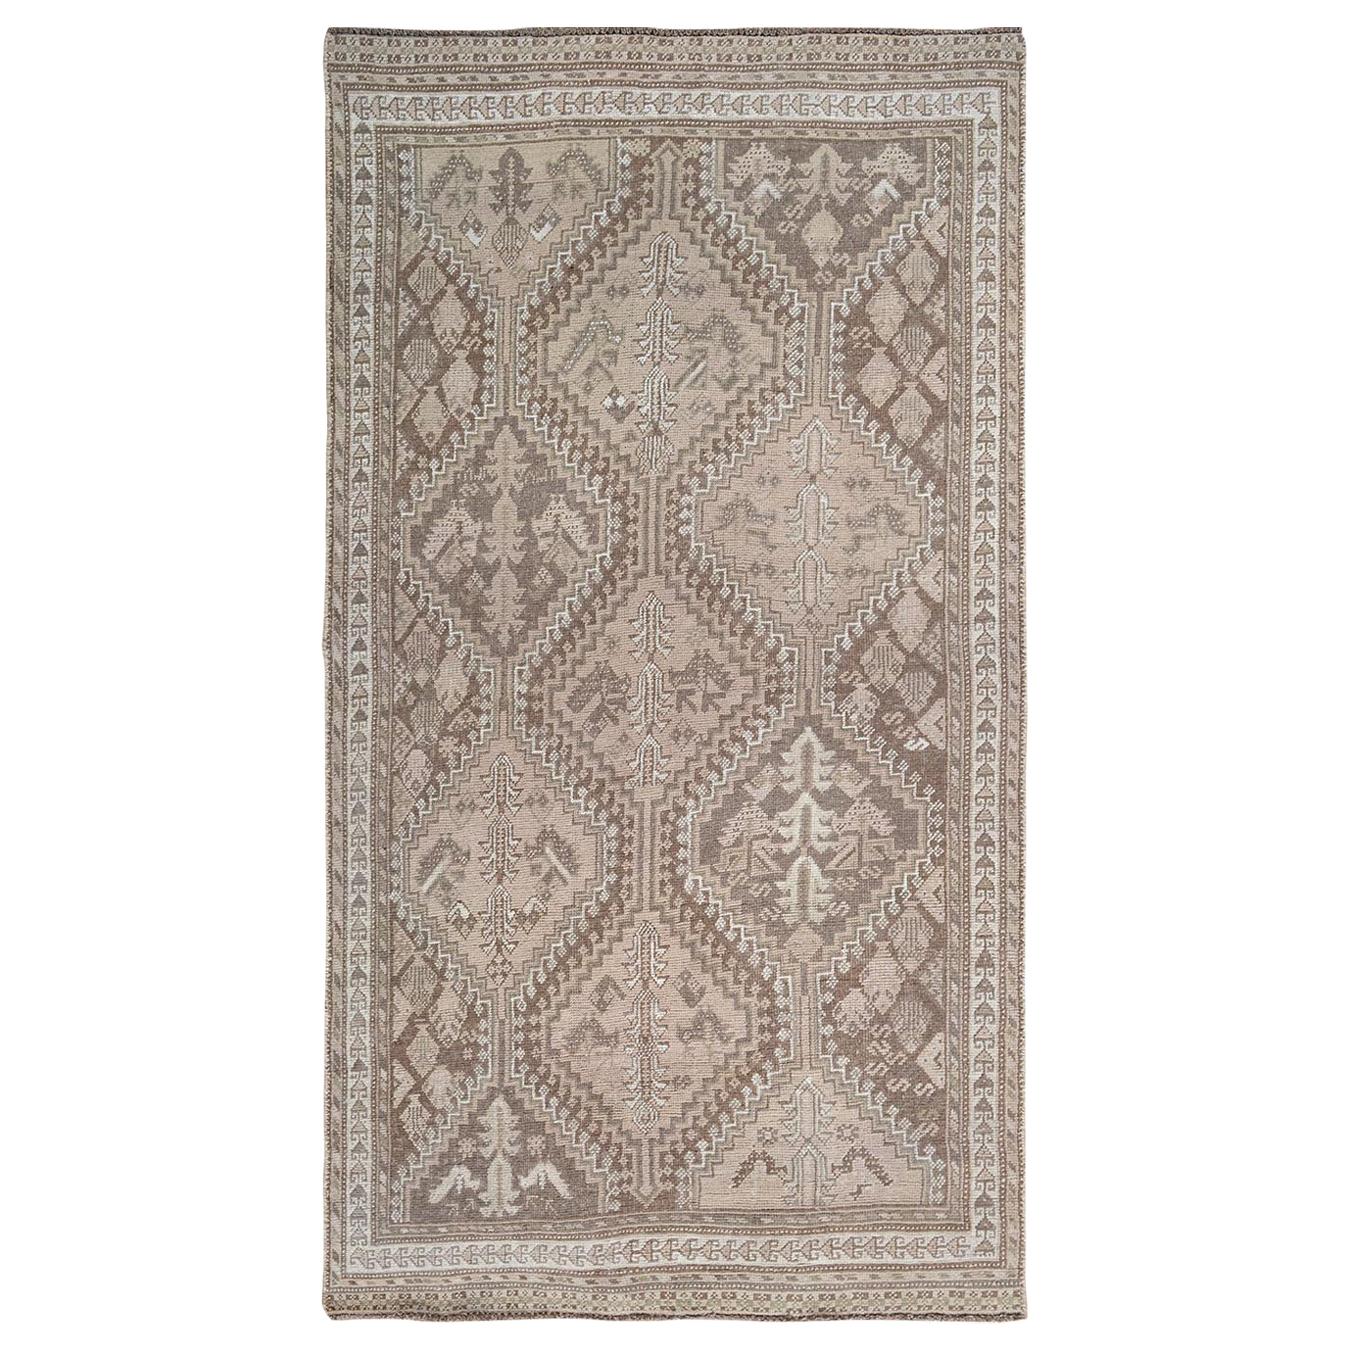 Earth Tone Colors Vintage and Worn Down Persian Qashqai Pure Wool Rug For Sale